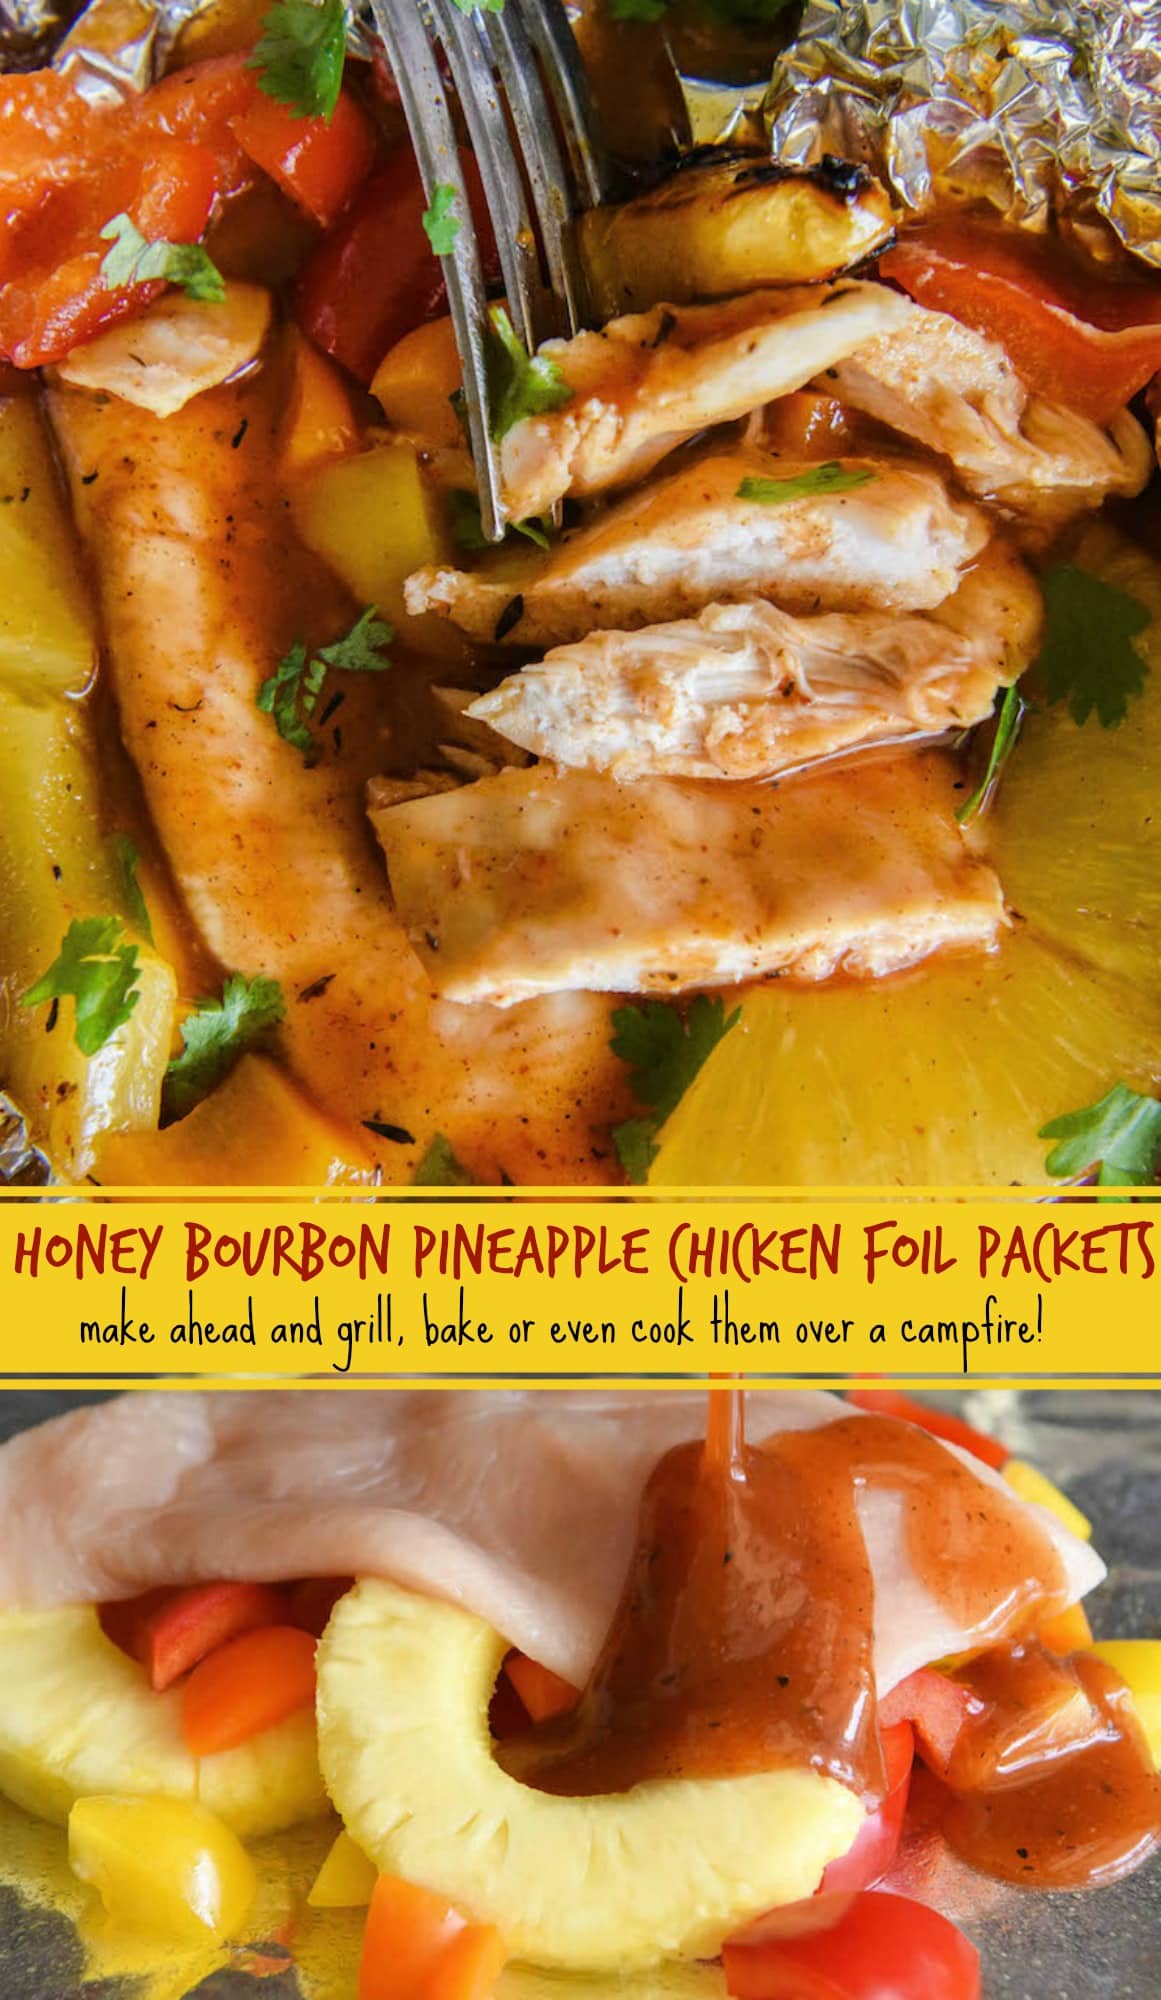 Honey Bourbon Pineapple Chicken Foil Packets: our favorite easy dinner made with your oven, grill or even a campfire! #grill #chicken